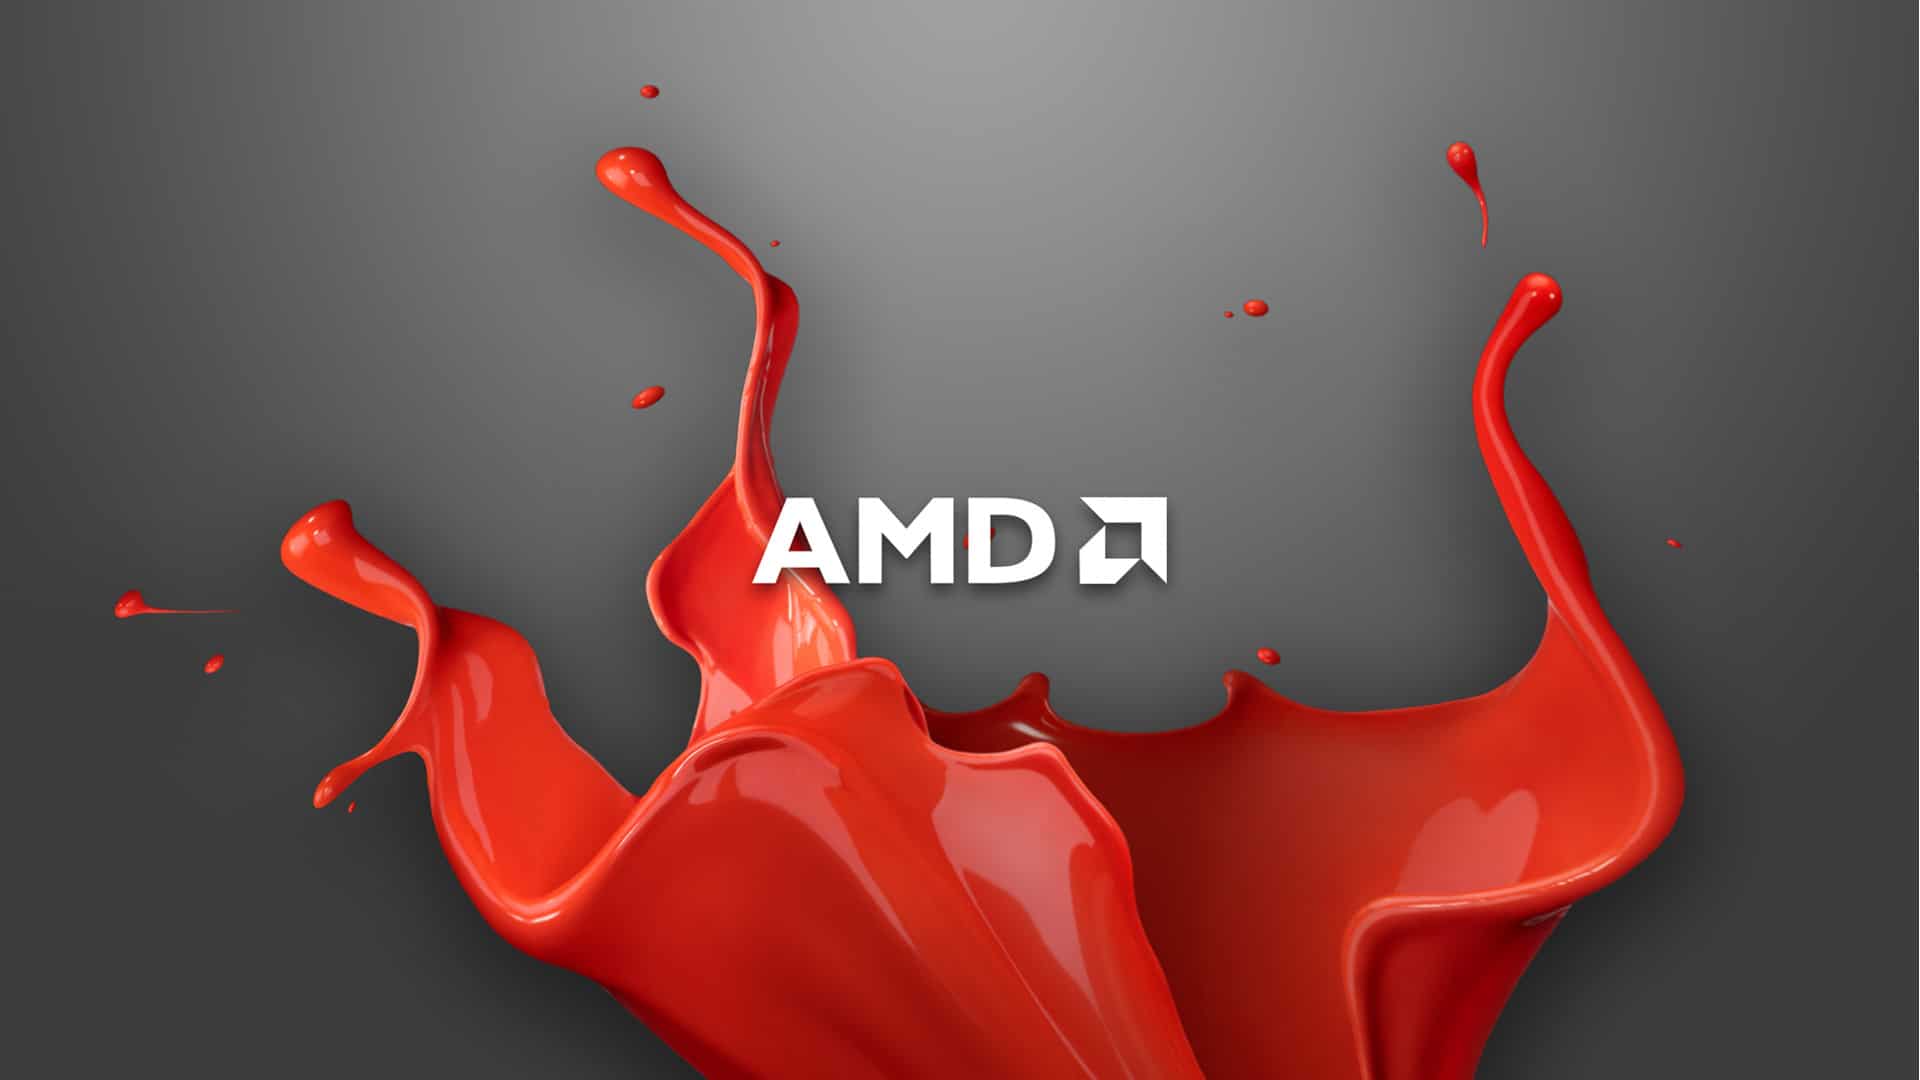 AMD Eyeing Up October 2020 Launch For Vermeer CPUs And Big Navi GPUs According To New Report